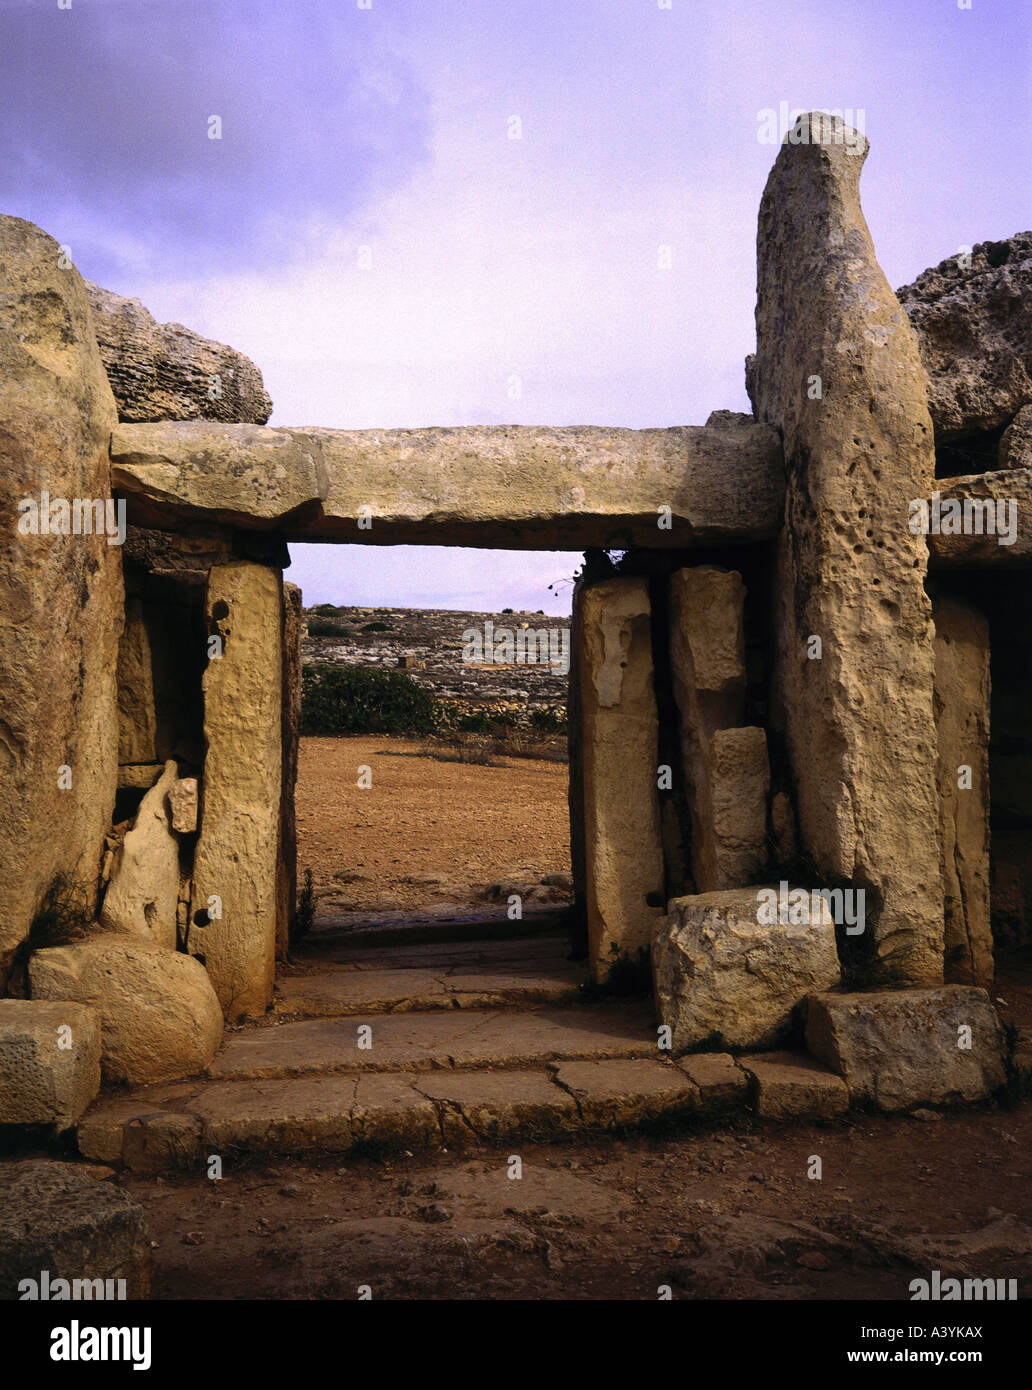 travel /geography, Malta, buildings, Mnajdra temple, trilith gate, forecourt, circa 3200 - 2500 B.C., historic, historical, Europe, architecture, early history, prehistory, megalith, megaliths, culture, religion, UNESCO world heritage, Stock Photo